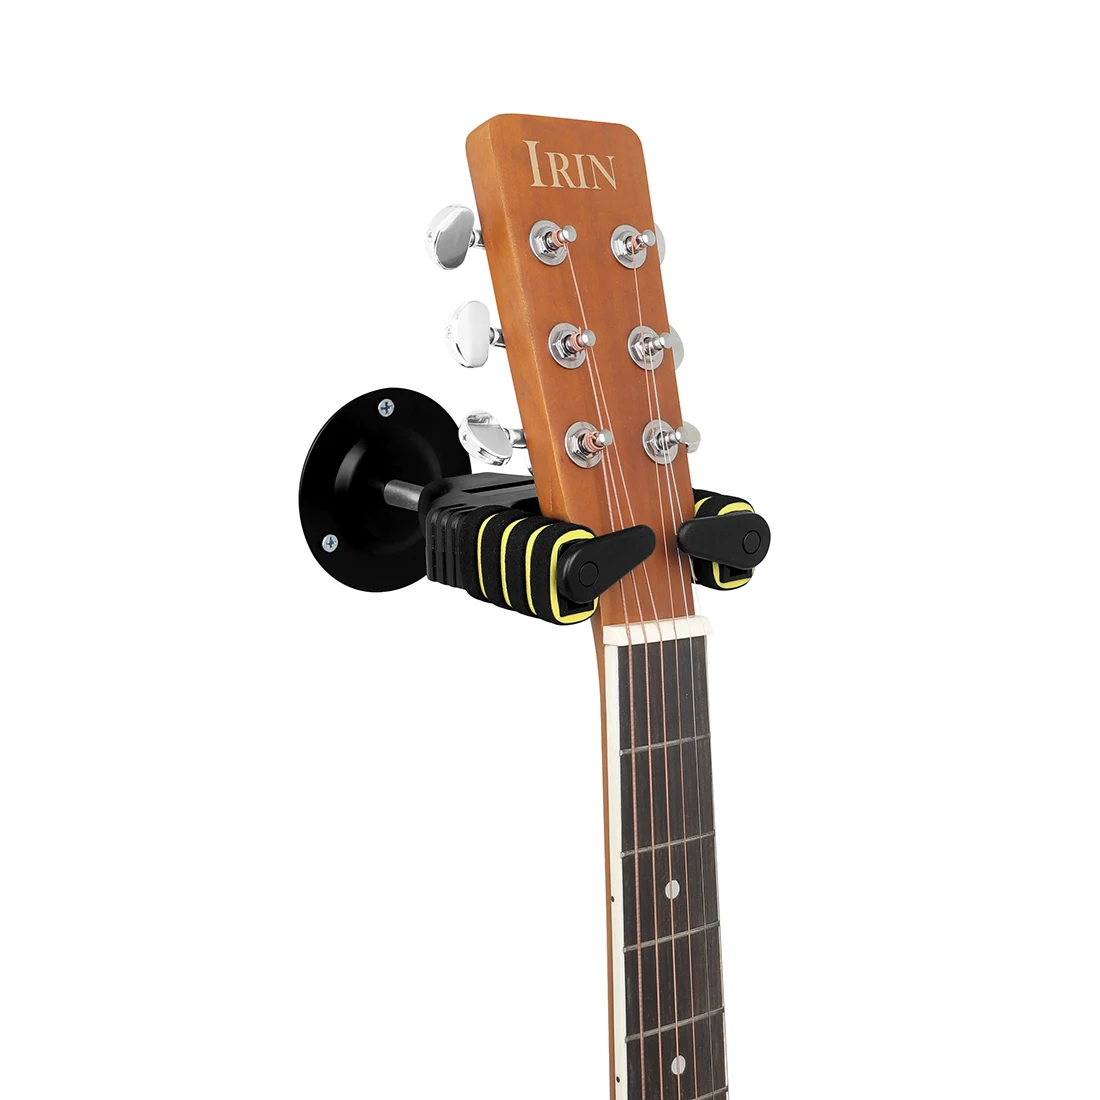 Guitar Stand Wall Mount Round Base Gravity Self-Locking Wall Stand Bracket Guitar Violin Bass Ukulele Guitar Parts Accessories black guitar hanger hook holder wall mount stand rack bracket display strong fixed wall for most guitar bass screws accessories